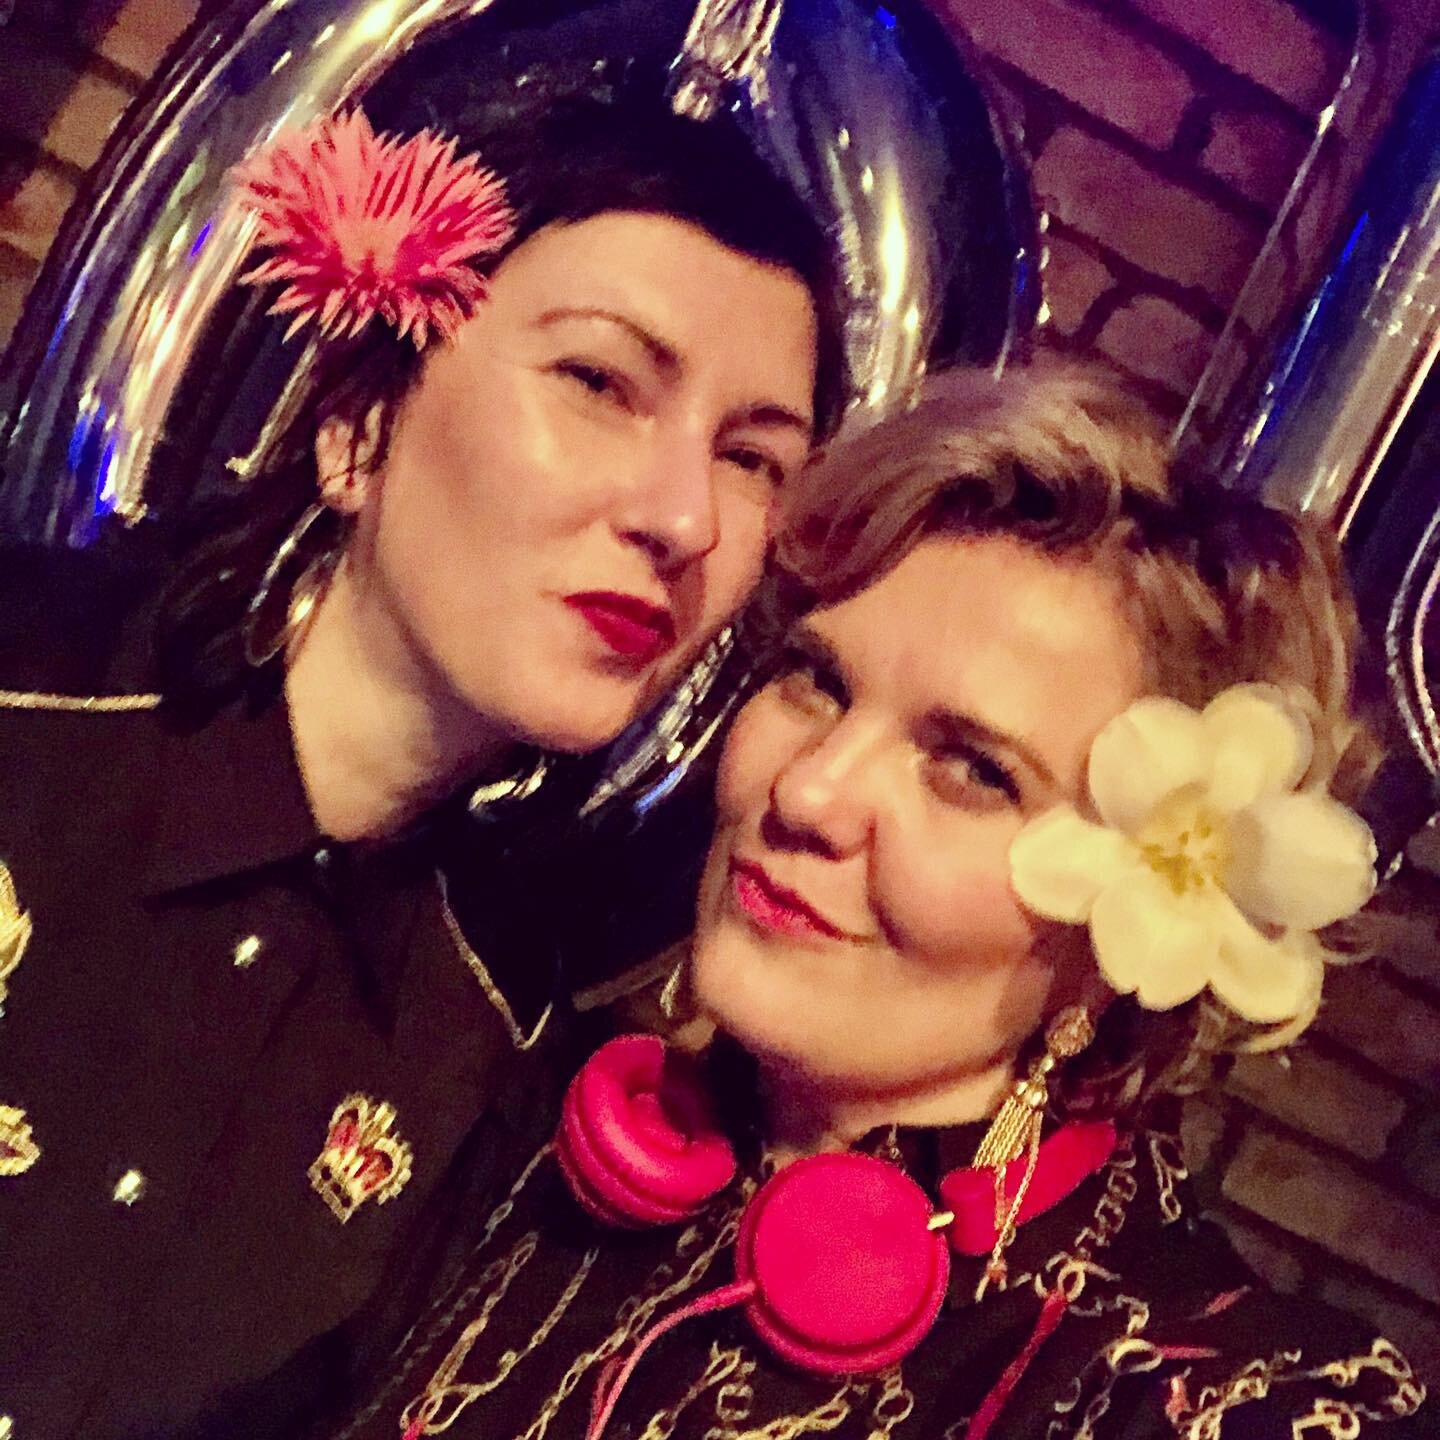 hey peeps, you can see ... our first &bdquo;berlinale&ldquo; dj gig was very flowery🌺🌸🌼🌻... the week will be very exciting ... stay tuned😉😊✨🥂🎧🎼...music for @idmfilmfunding ❣️
.
.
.
#berlinale #berlinale2020 #idmfilmfunding #dreamteam #djlove